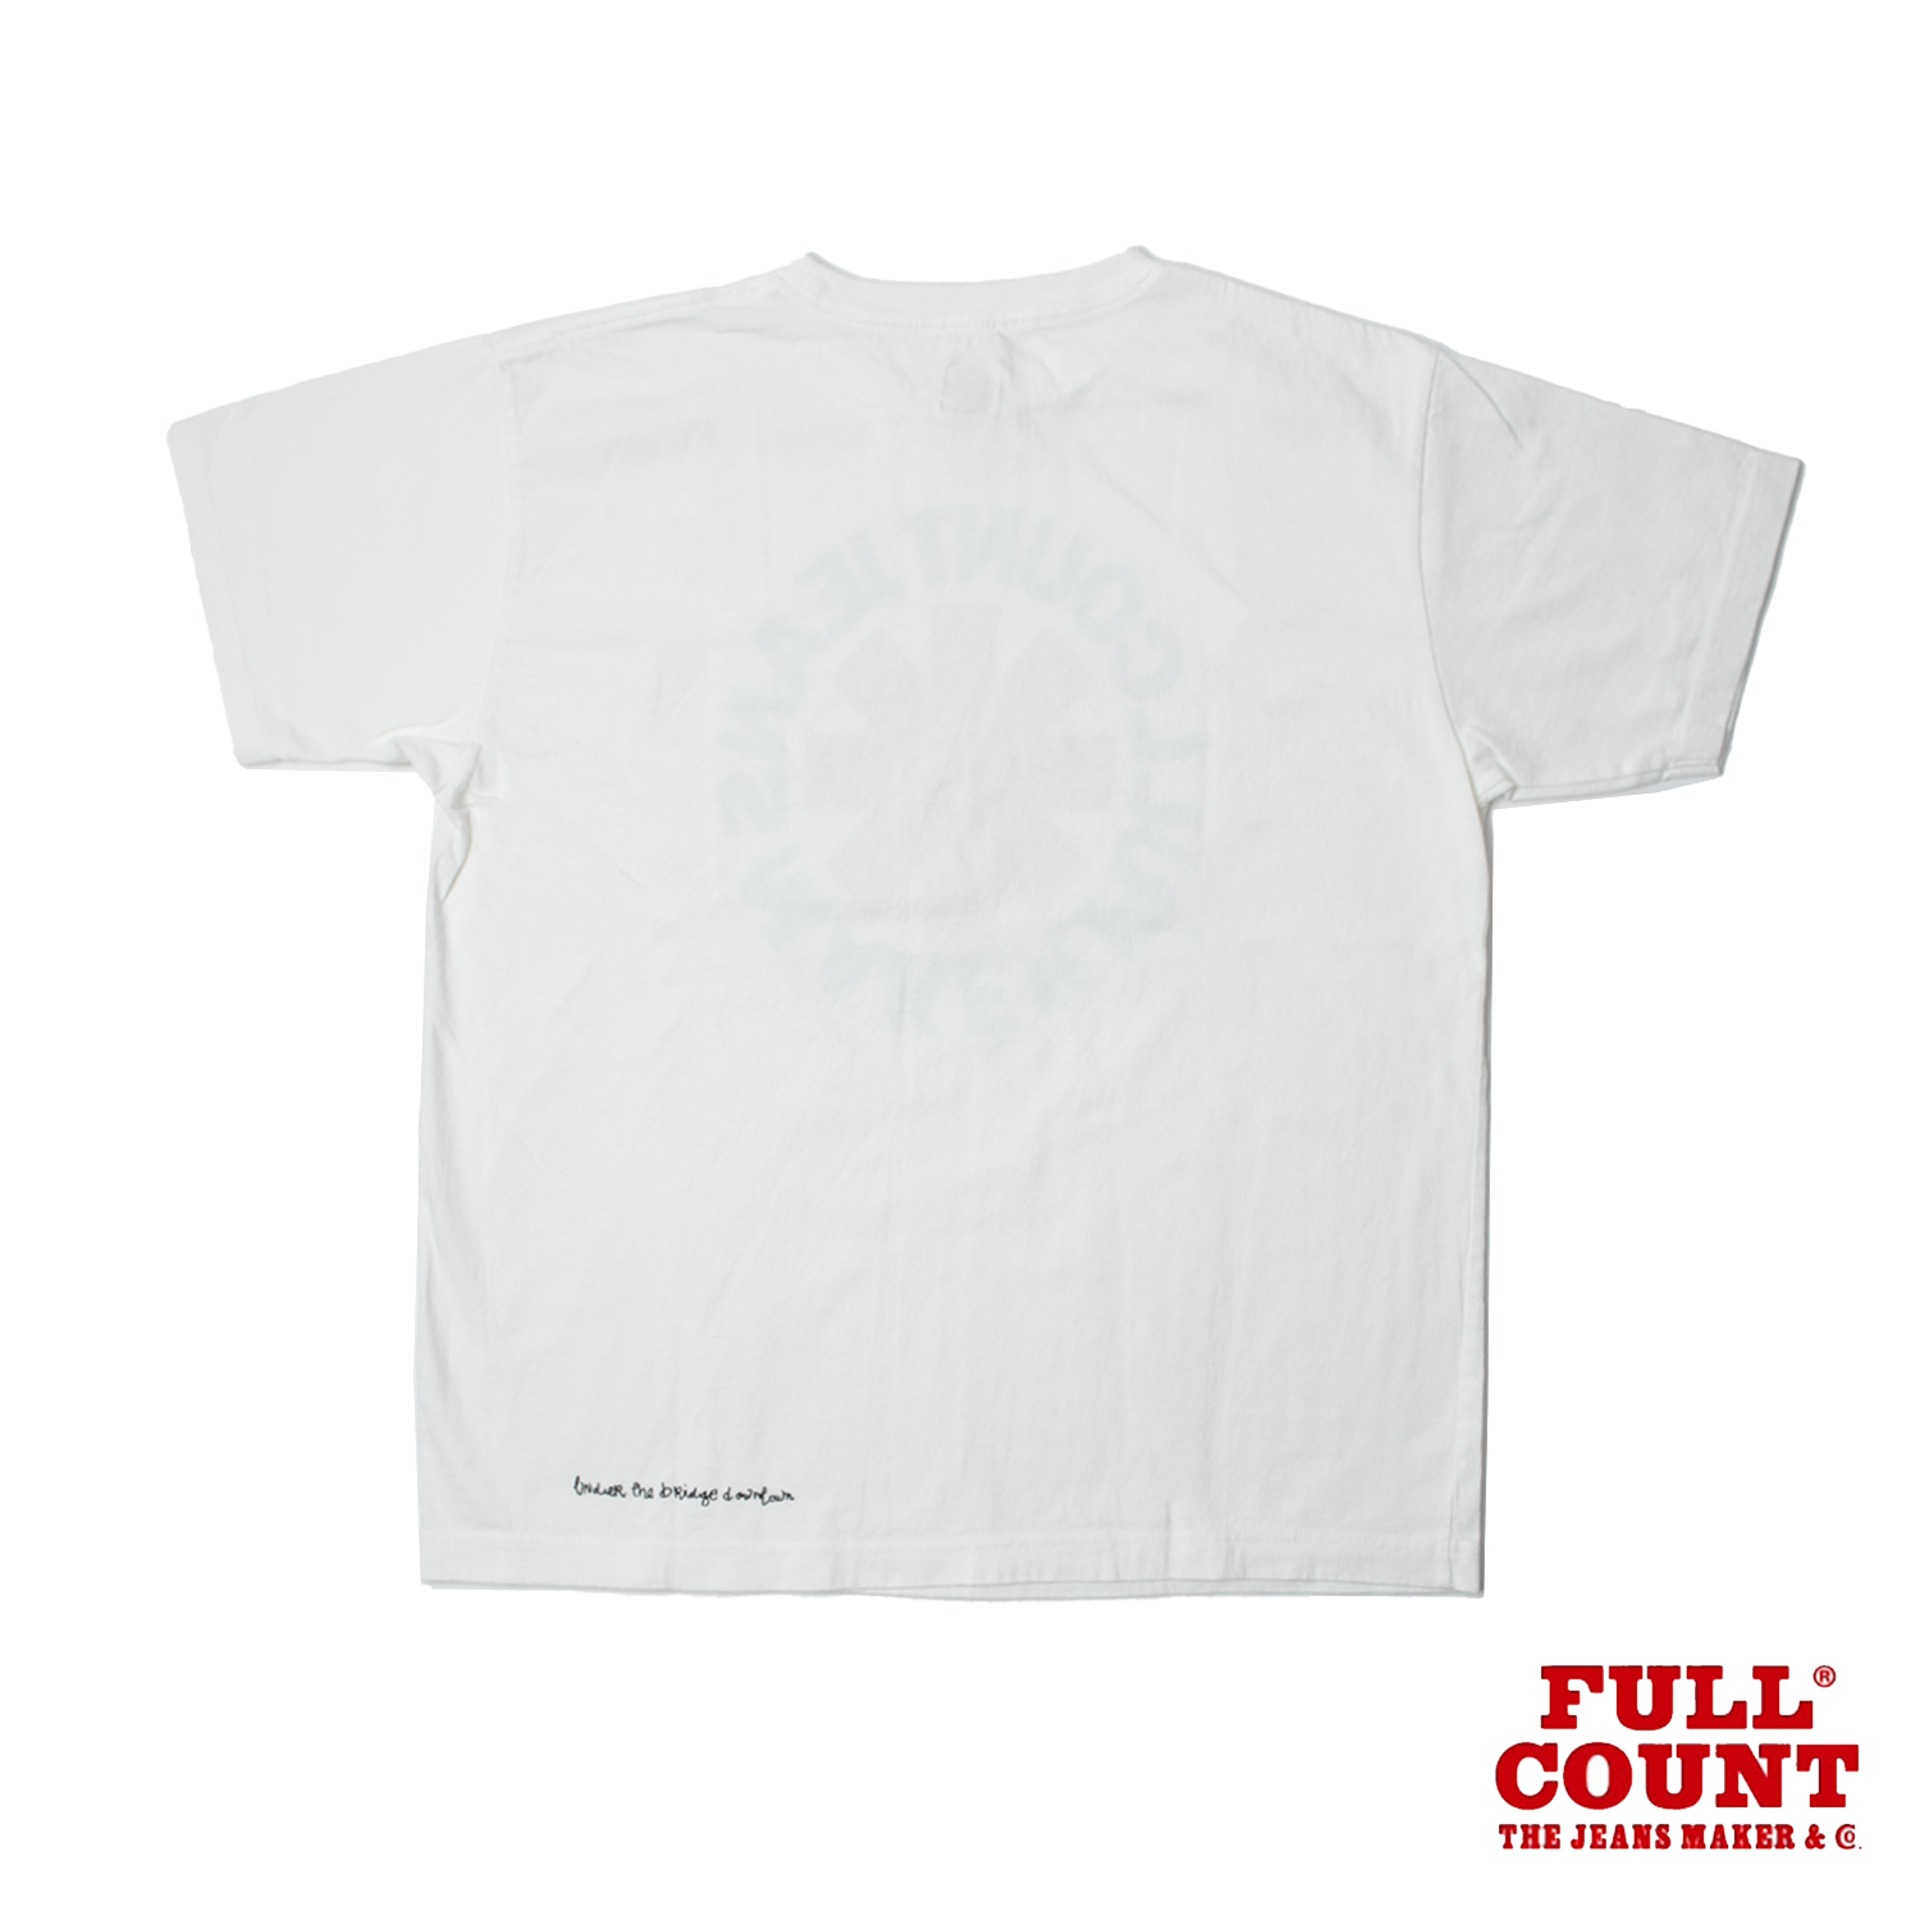 S/S T-SHIRTS &quot;FULLCOUNT JEANS MAKERS&quot; (White)